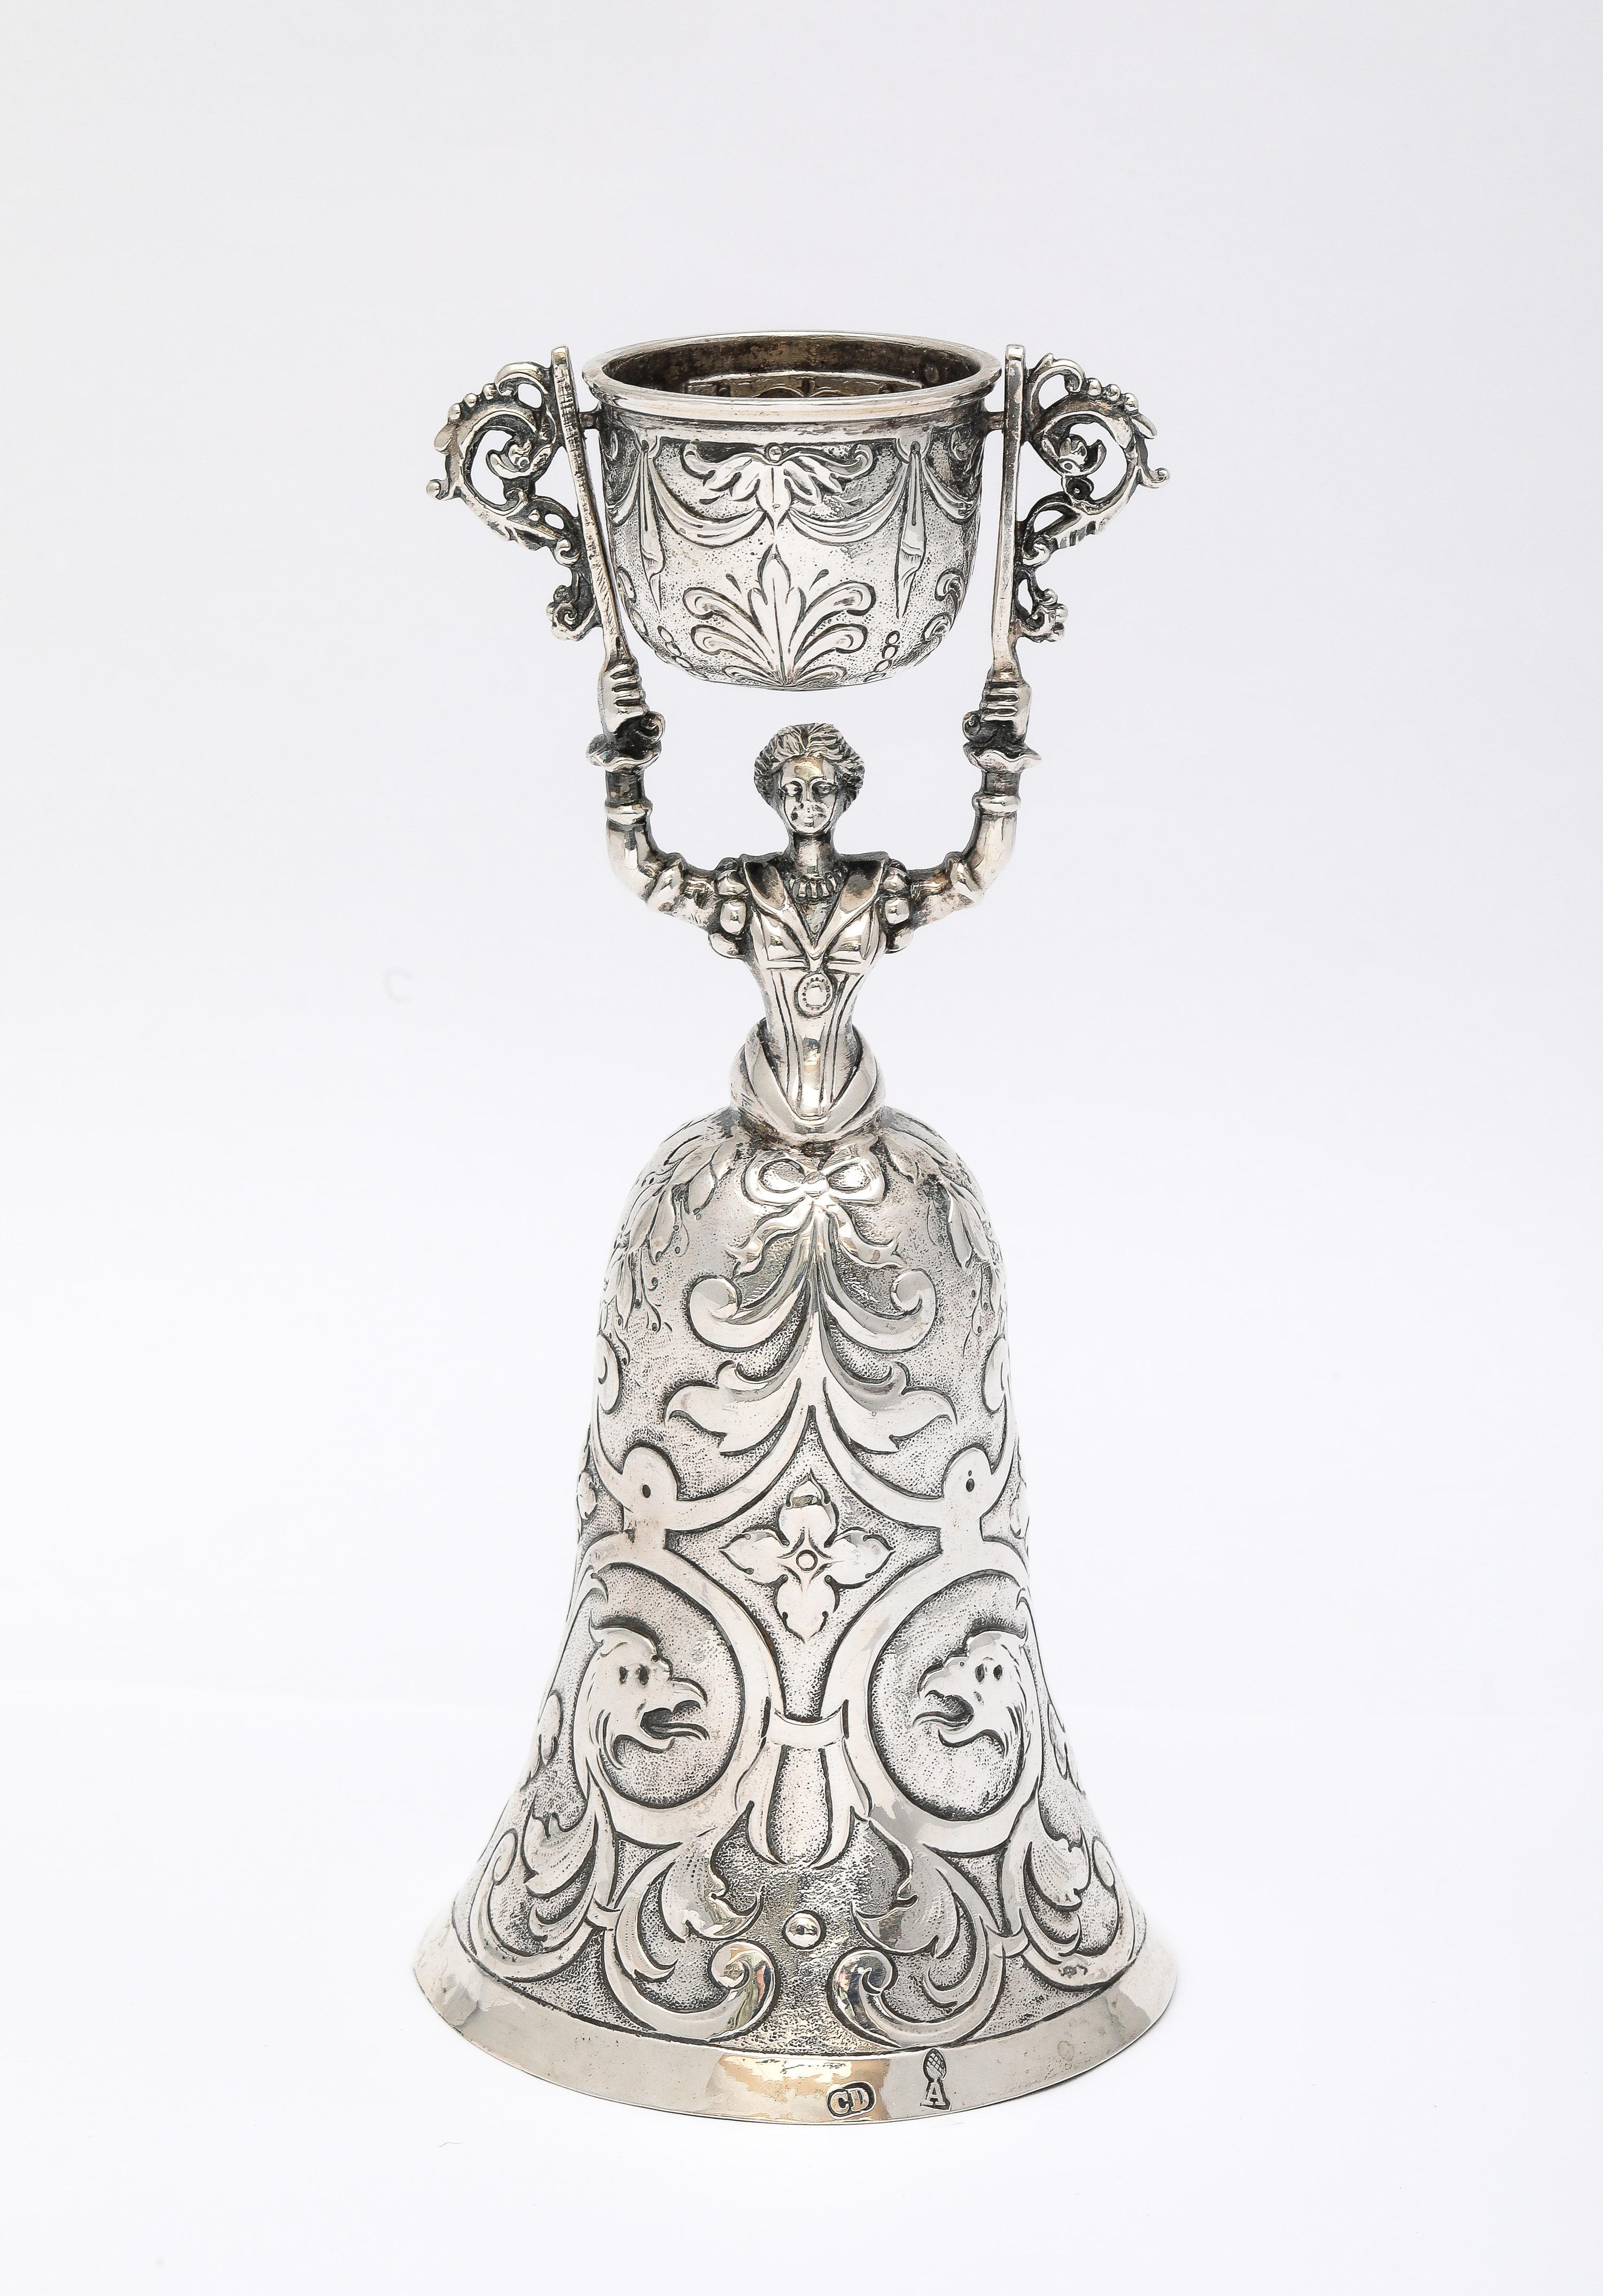 Rare, 18th century, Continental Silver (.800) Wager/Marriage Cup, Augsburg, 1781-1783, Christian Drentwert II - maker. The figure is of a woman, arms raised, holding up a cup on a swivel. Her skirt is decorated with dragons, swirls,bows, etc. When